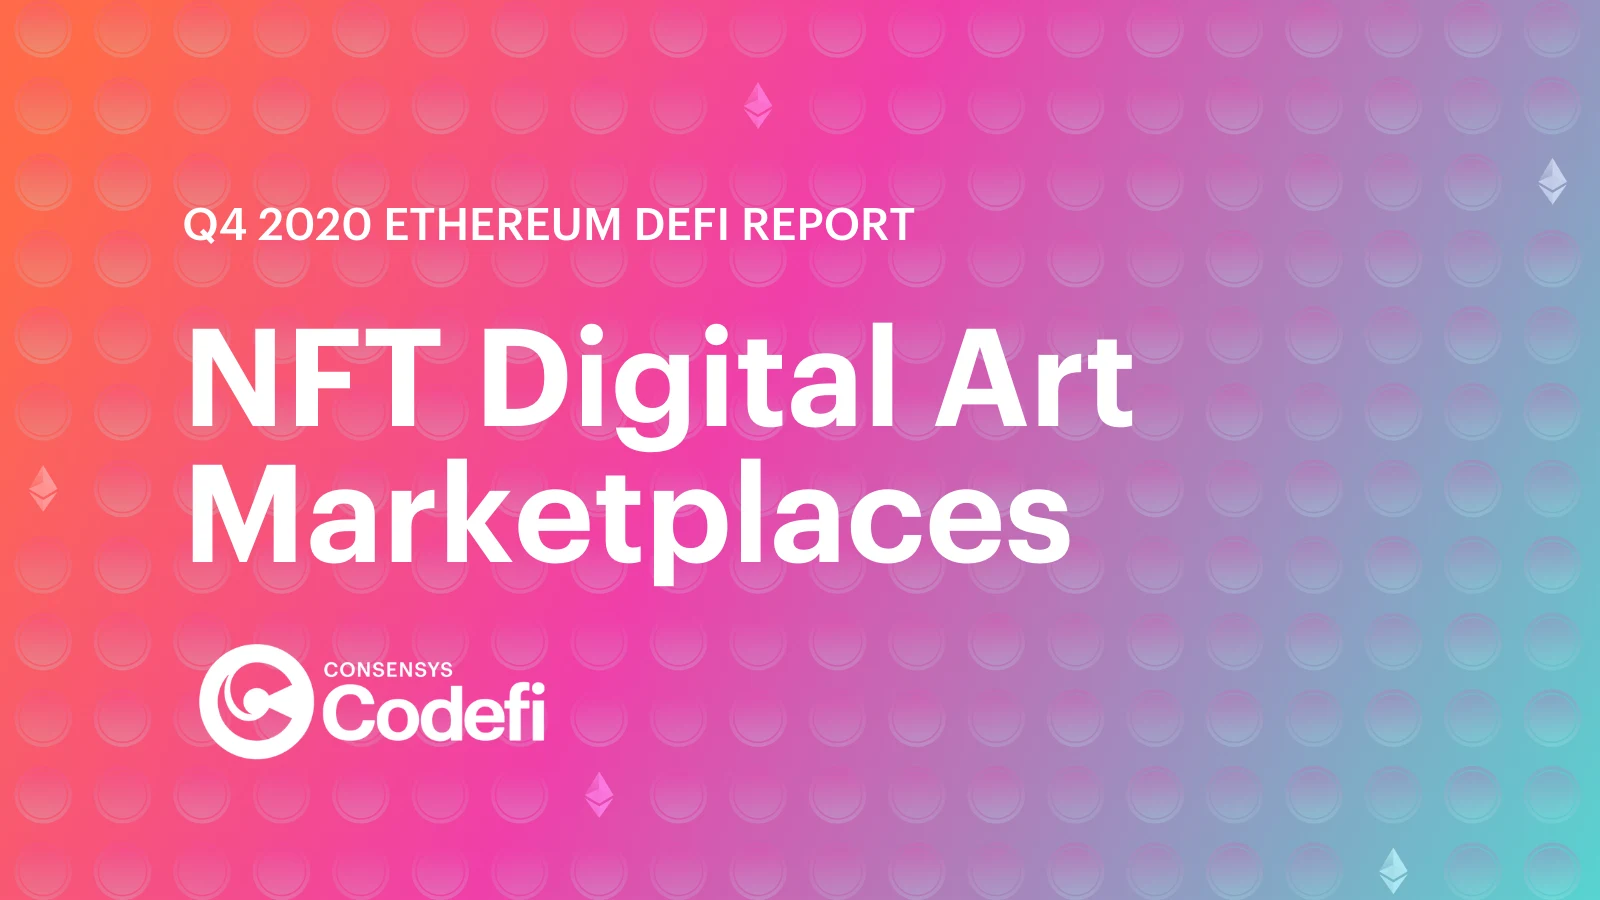 Image: How NFT Art Marketplaces are Merging with DeFi